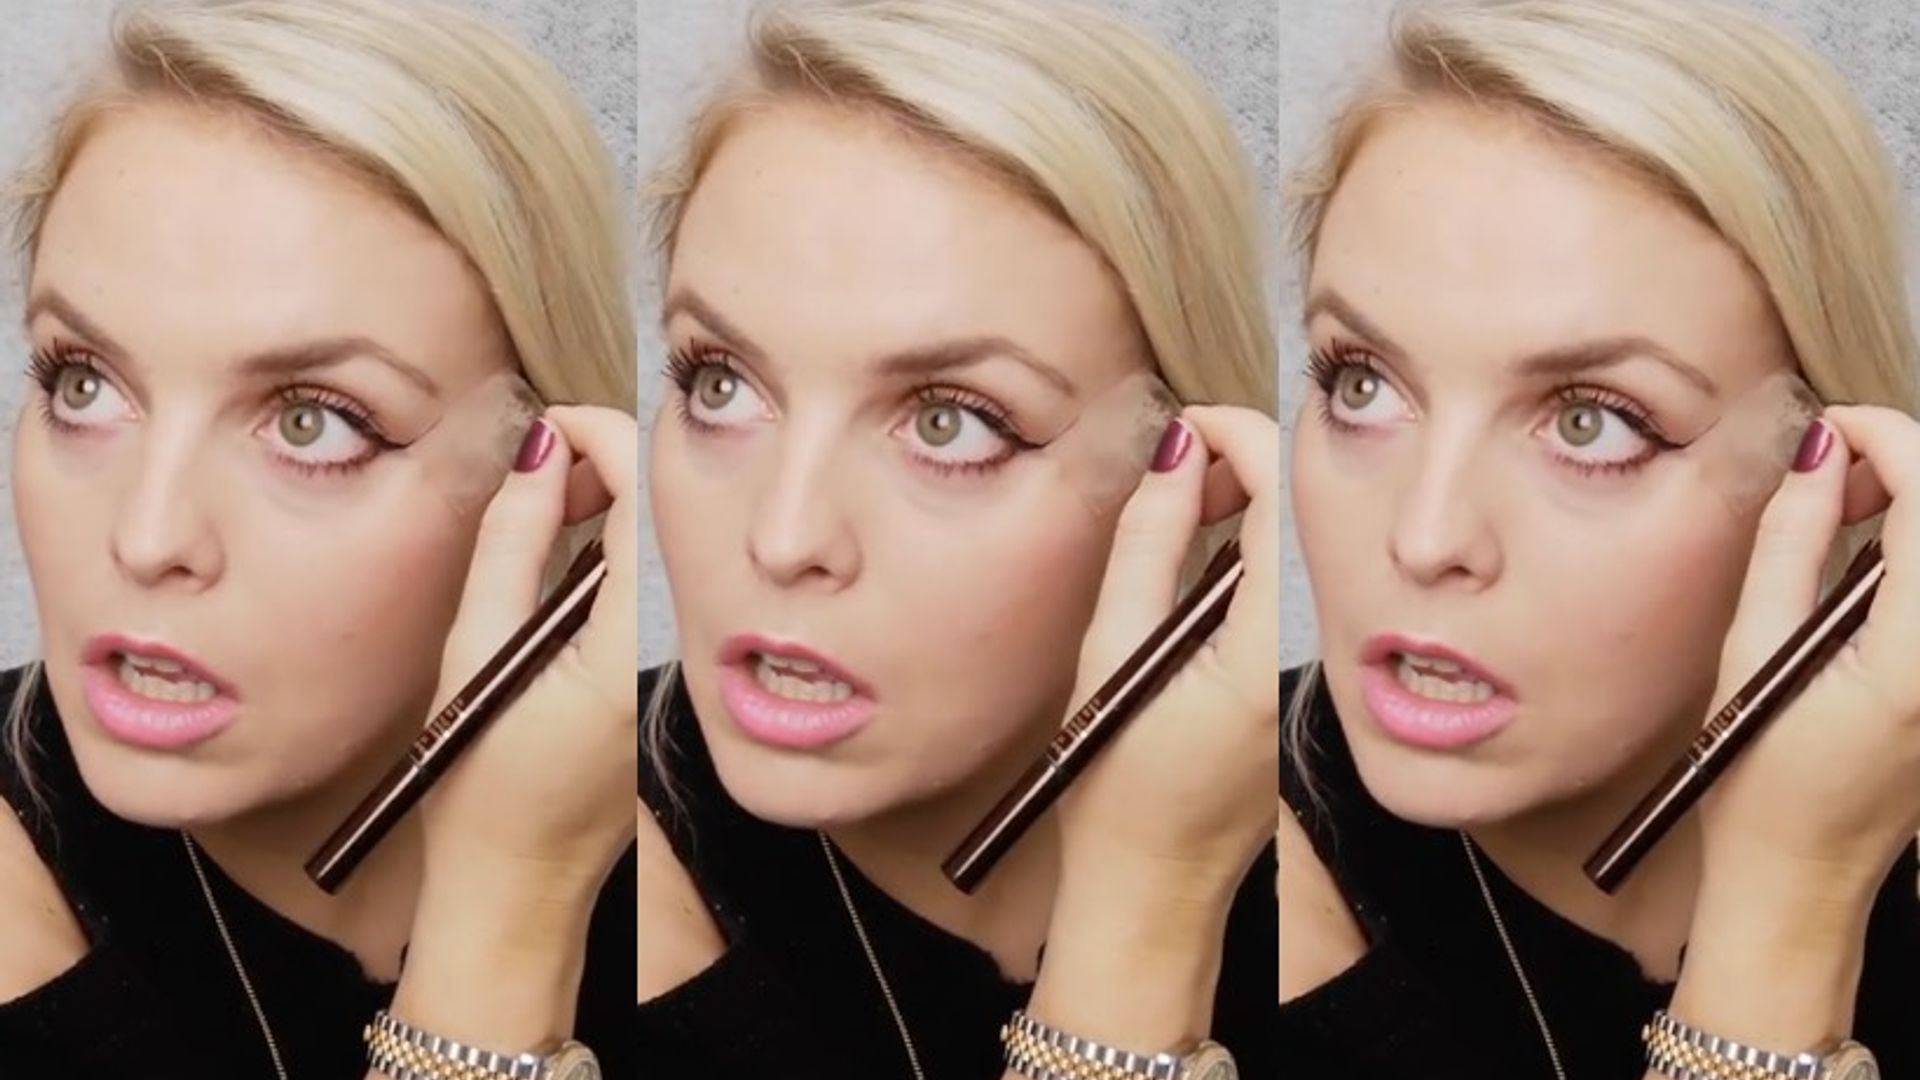 Beauty Hack: How to get the perfect winged eyeliner using Sellotape